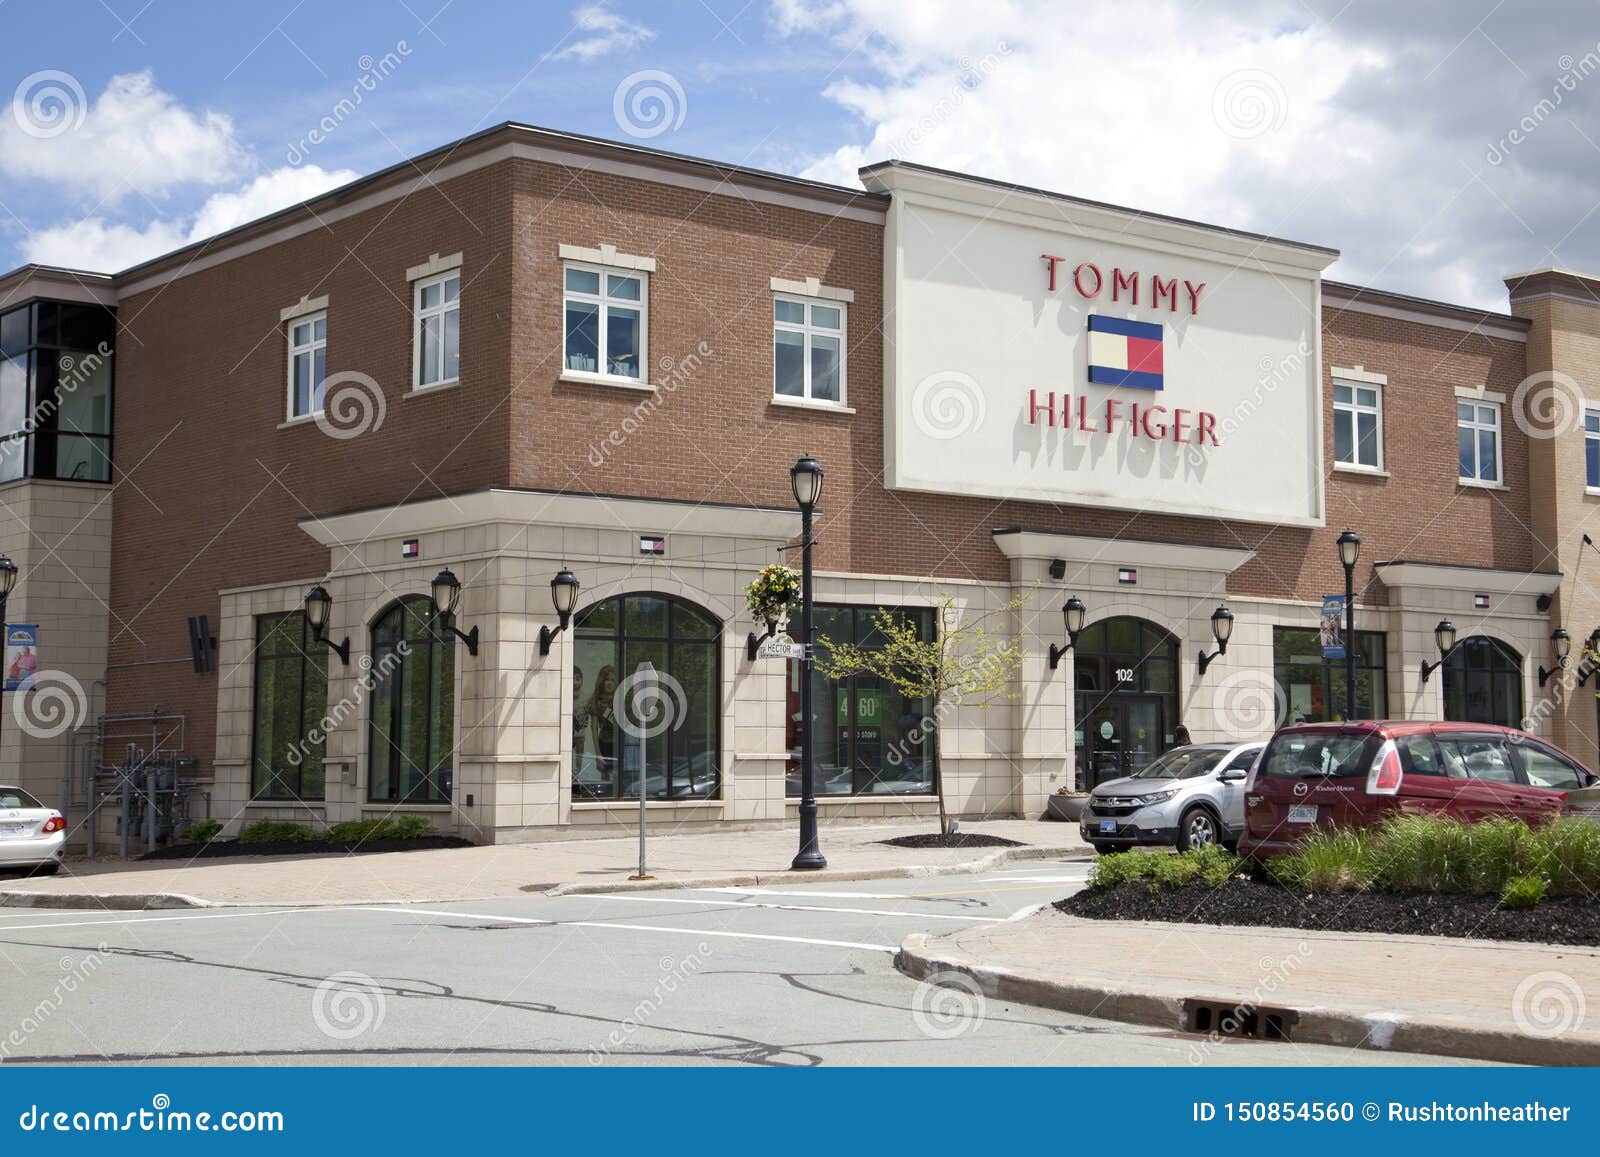 Corner View of Tommy Hilfiger Outlet Store in Dartmouth Editorial Image - Image of company, gate: